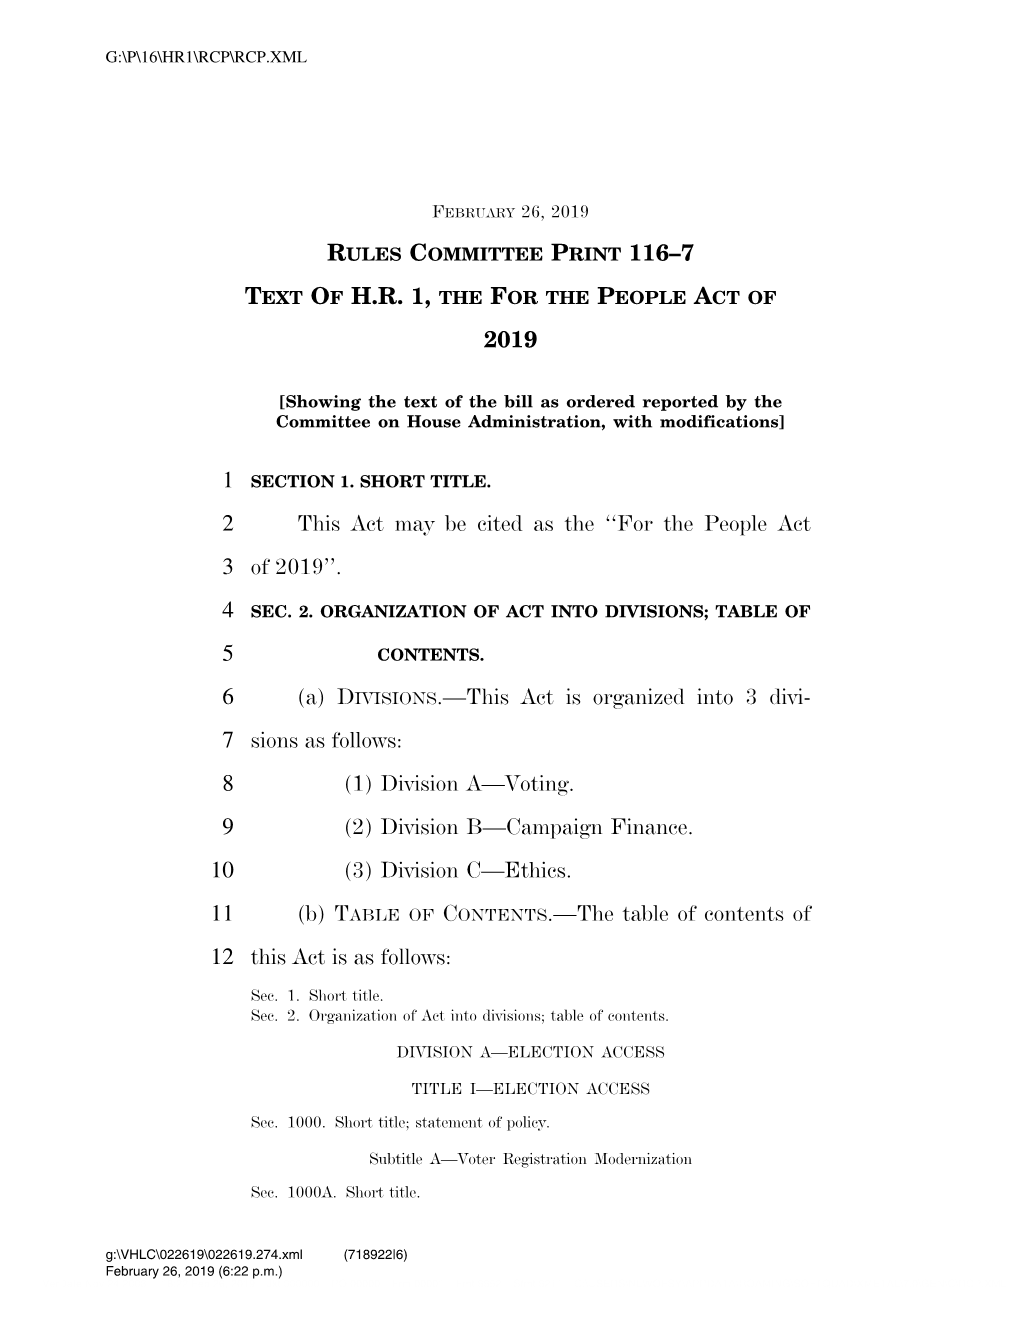 Rules Committee Print 116–7 Text of Hr 1, the for the People Act of 2019